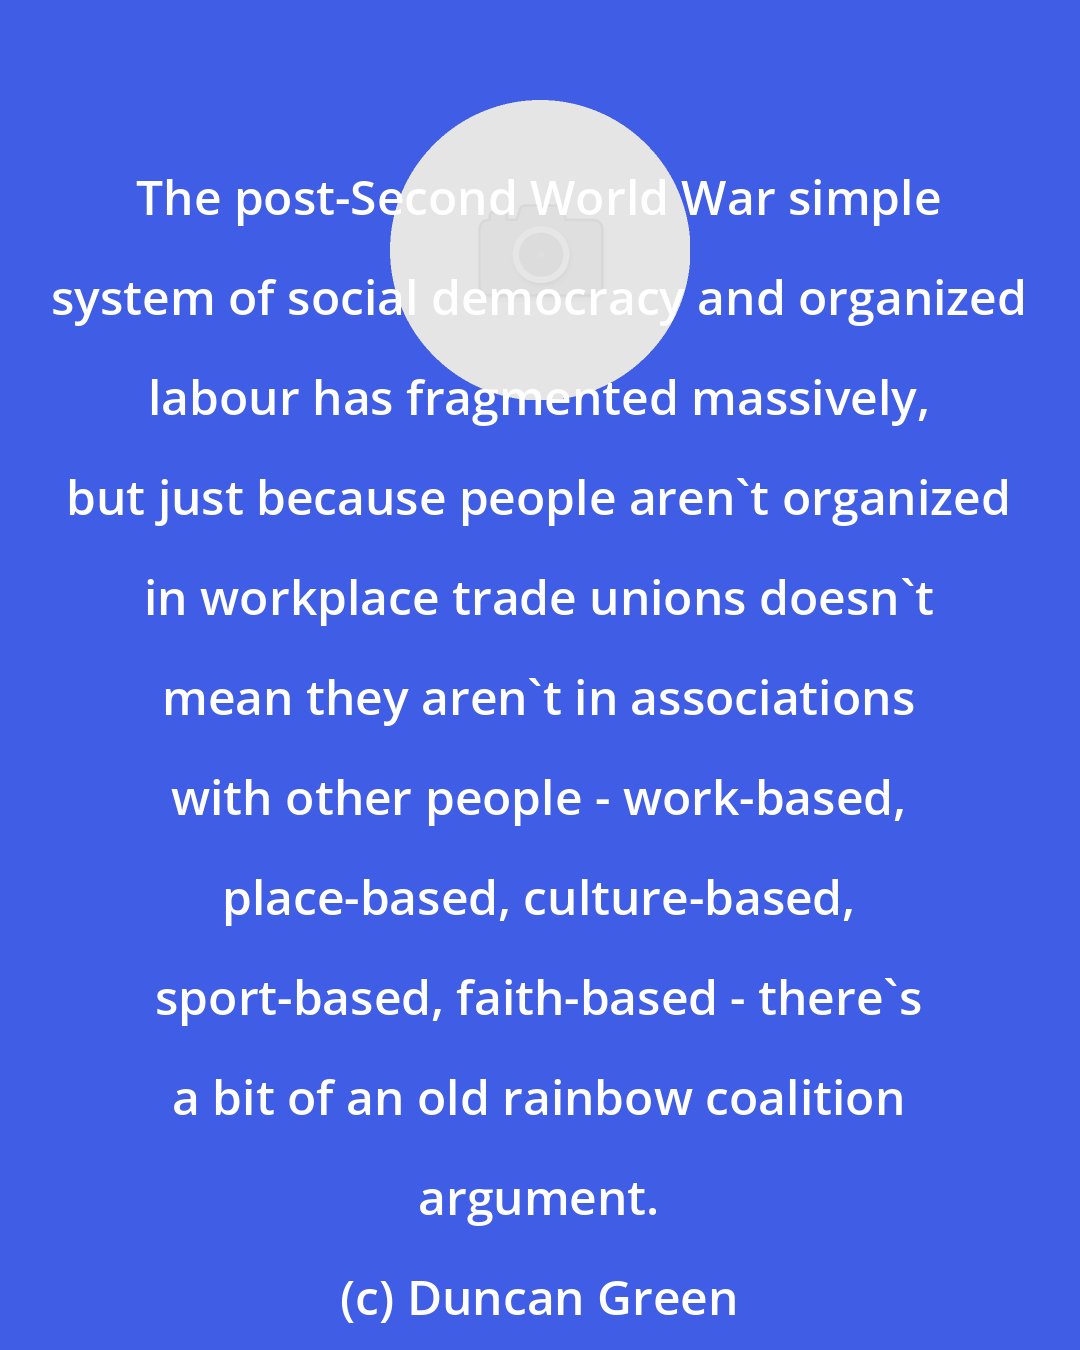 Duncan Green: The post-Second World War simple system of social democracy and organized labour has fragmented massively, but just because people aren't organized in workplace trade unions doesn't mean they aren't in associations with other people - work-based, place-based, culture-based, sport-based, faith-based - there's a bit of an old rainbow coalition argument.